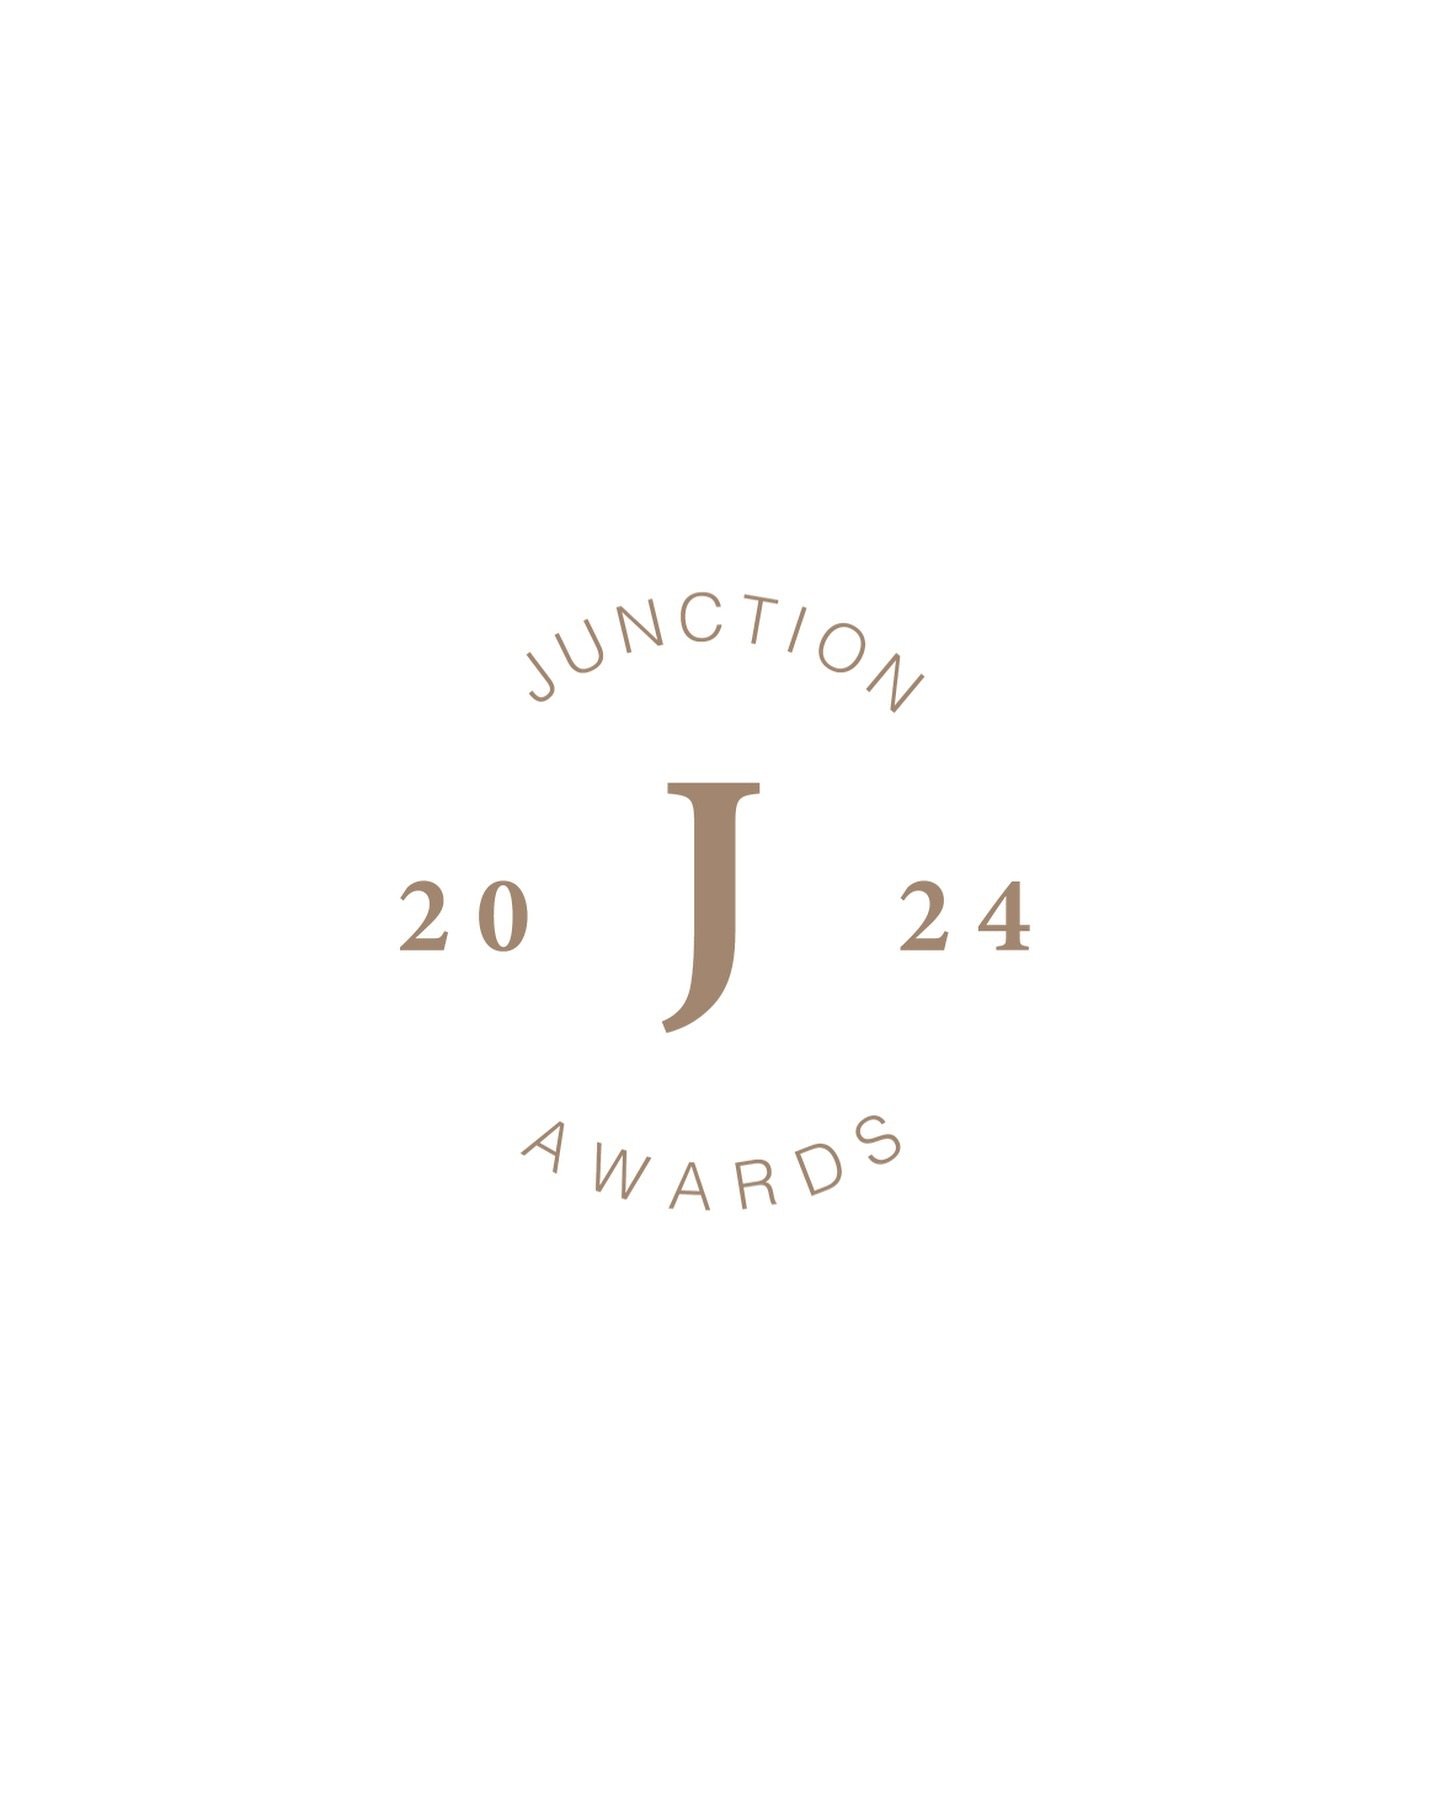 Voting for the 2024 Junction Awards has officially opened! Head to the link in our bio or visit our website to cast your votes for your favorite local businesses. Voting is open until Wednesday, the 26th of June.

Prizes await all businesses at the t